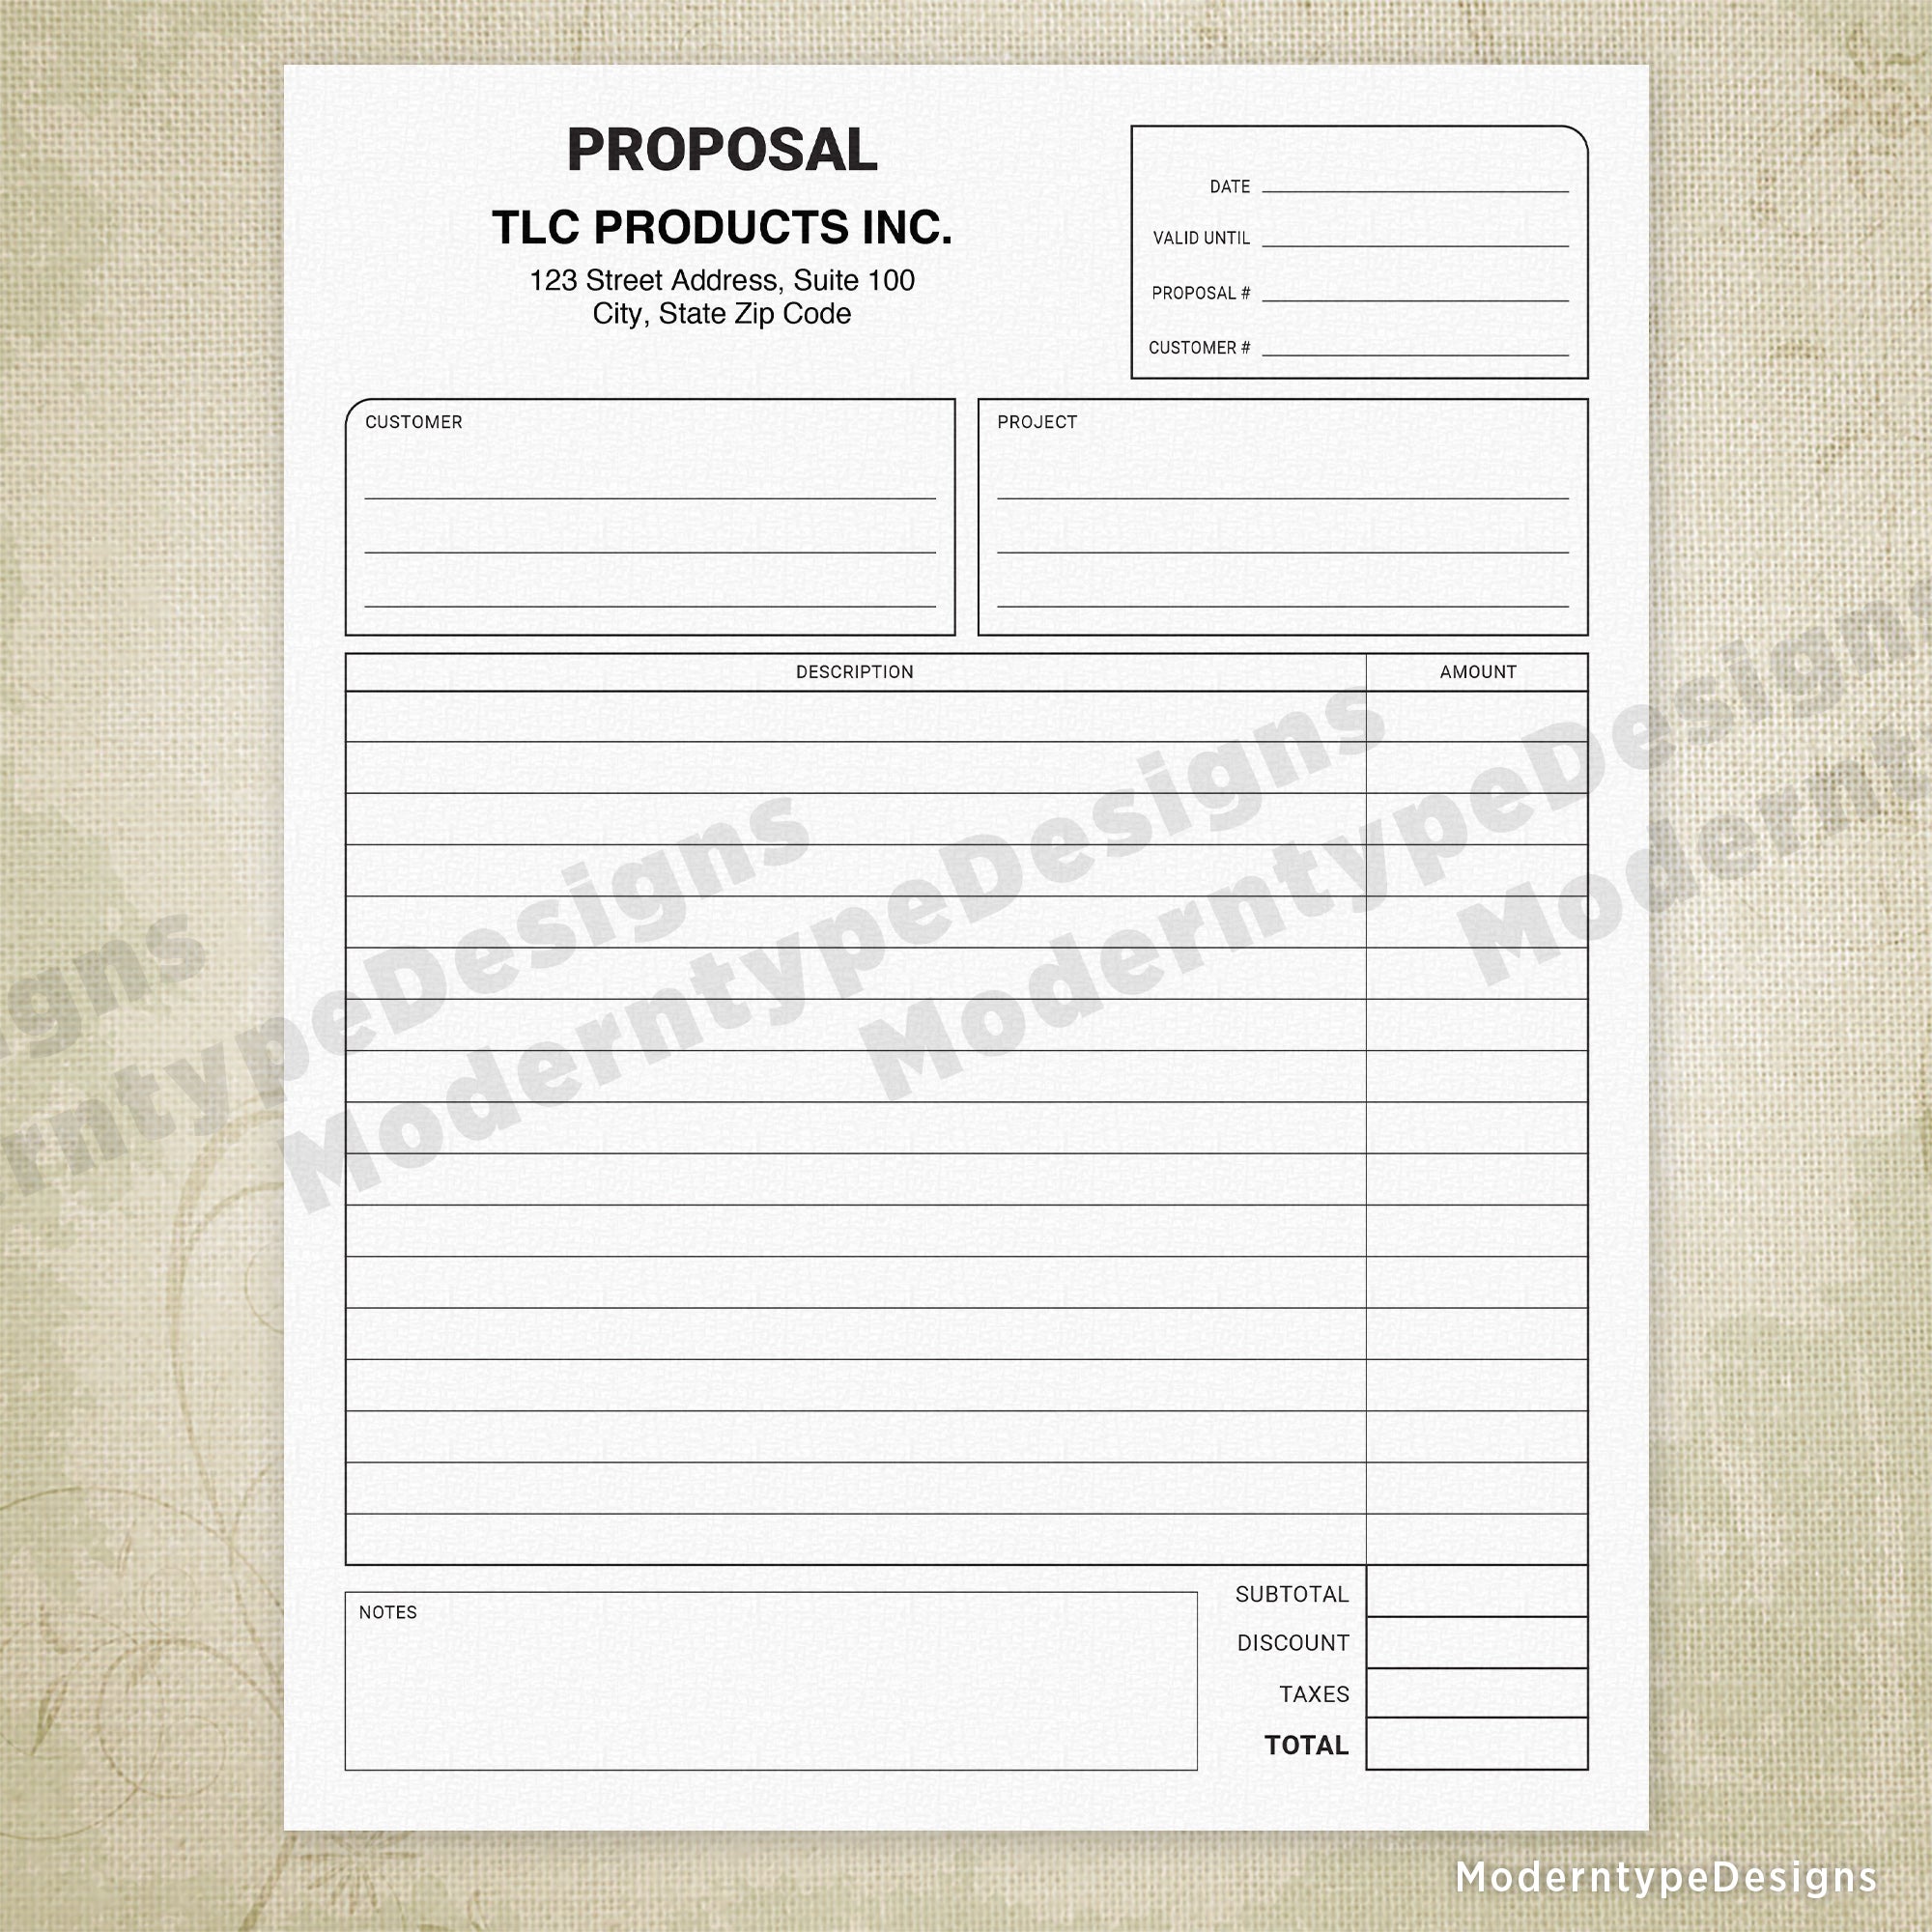 Proposal Printable Form with Lines, Editable, #3